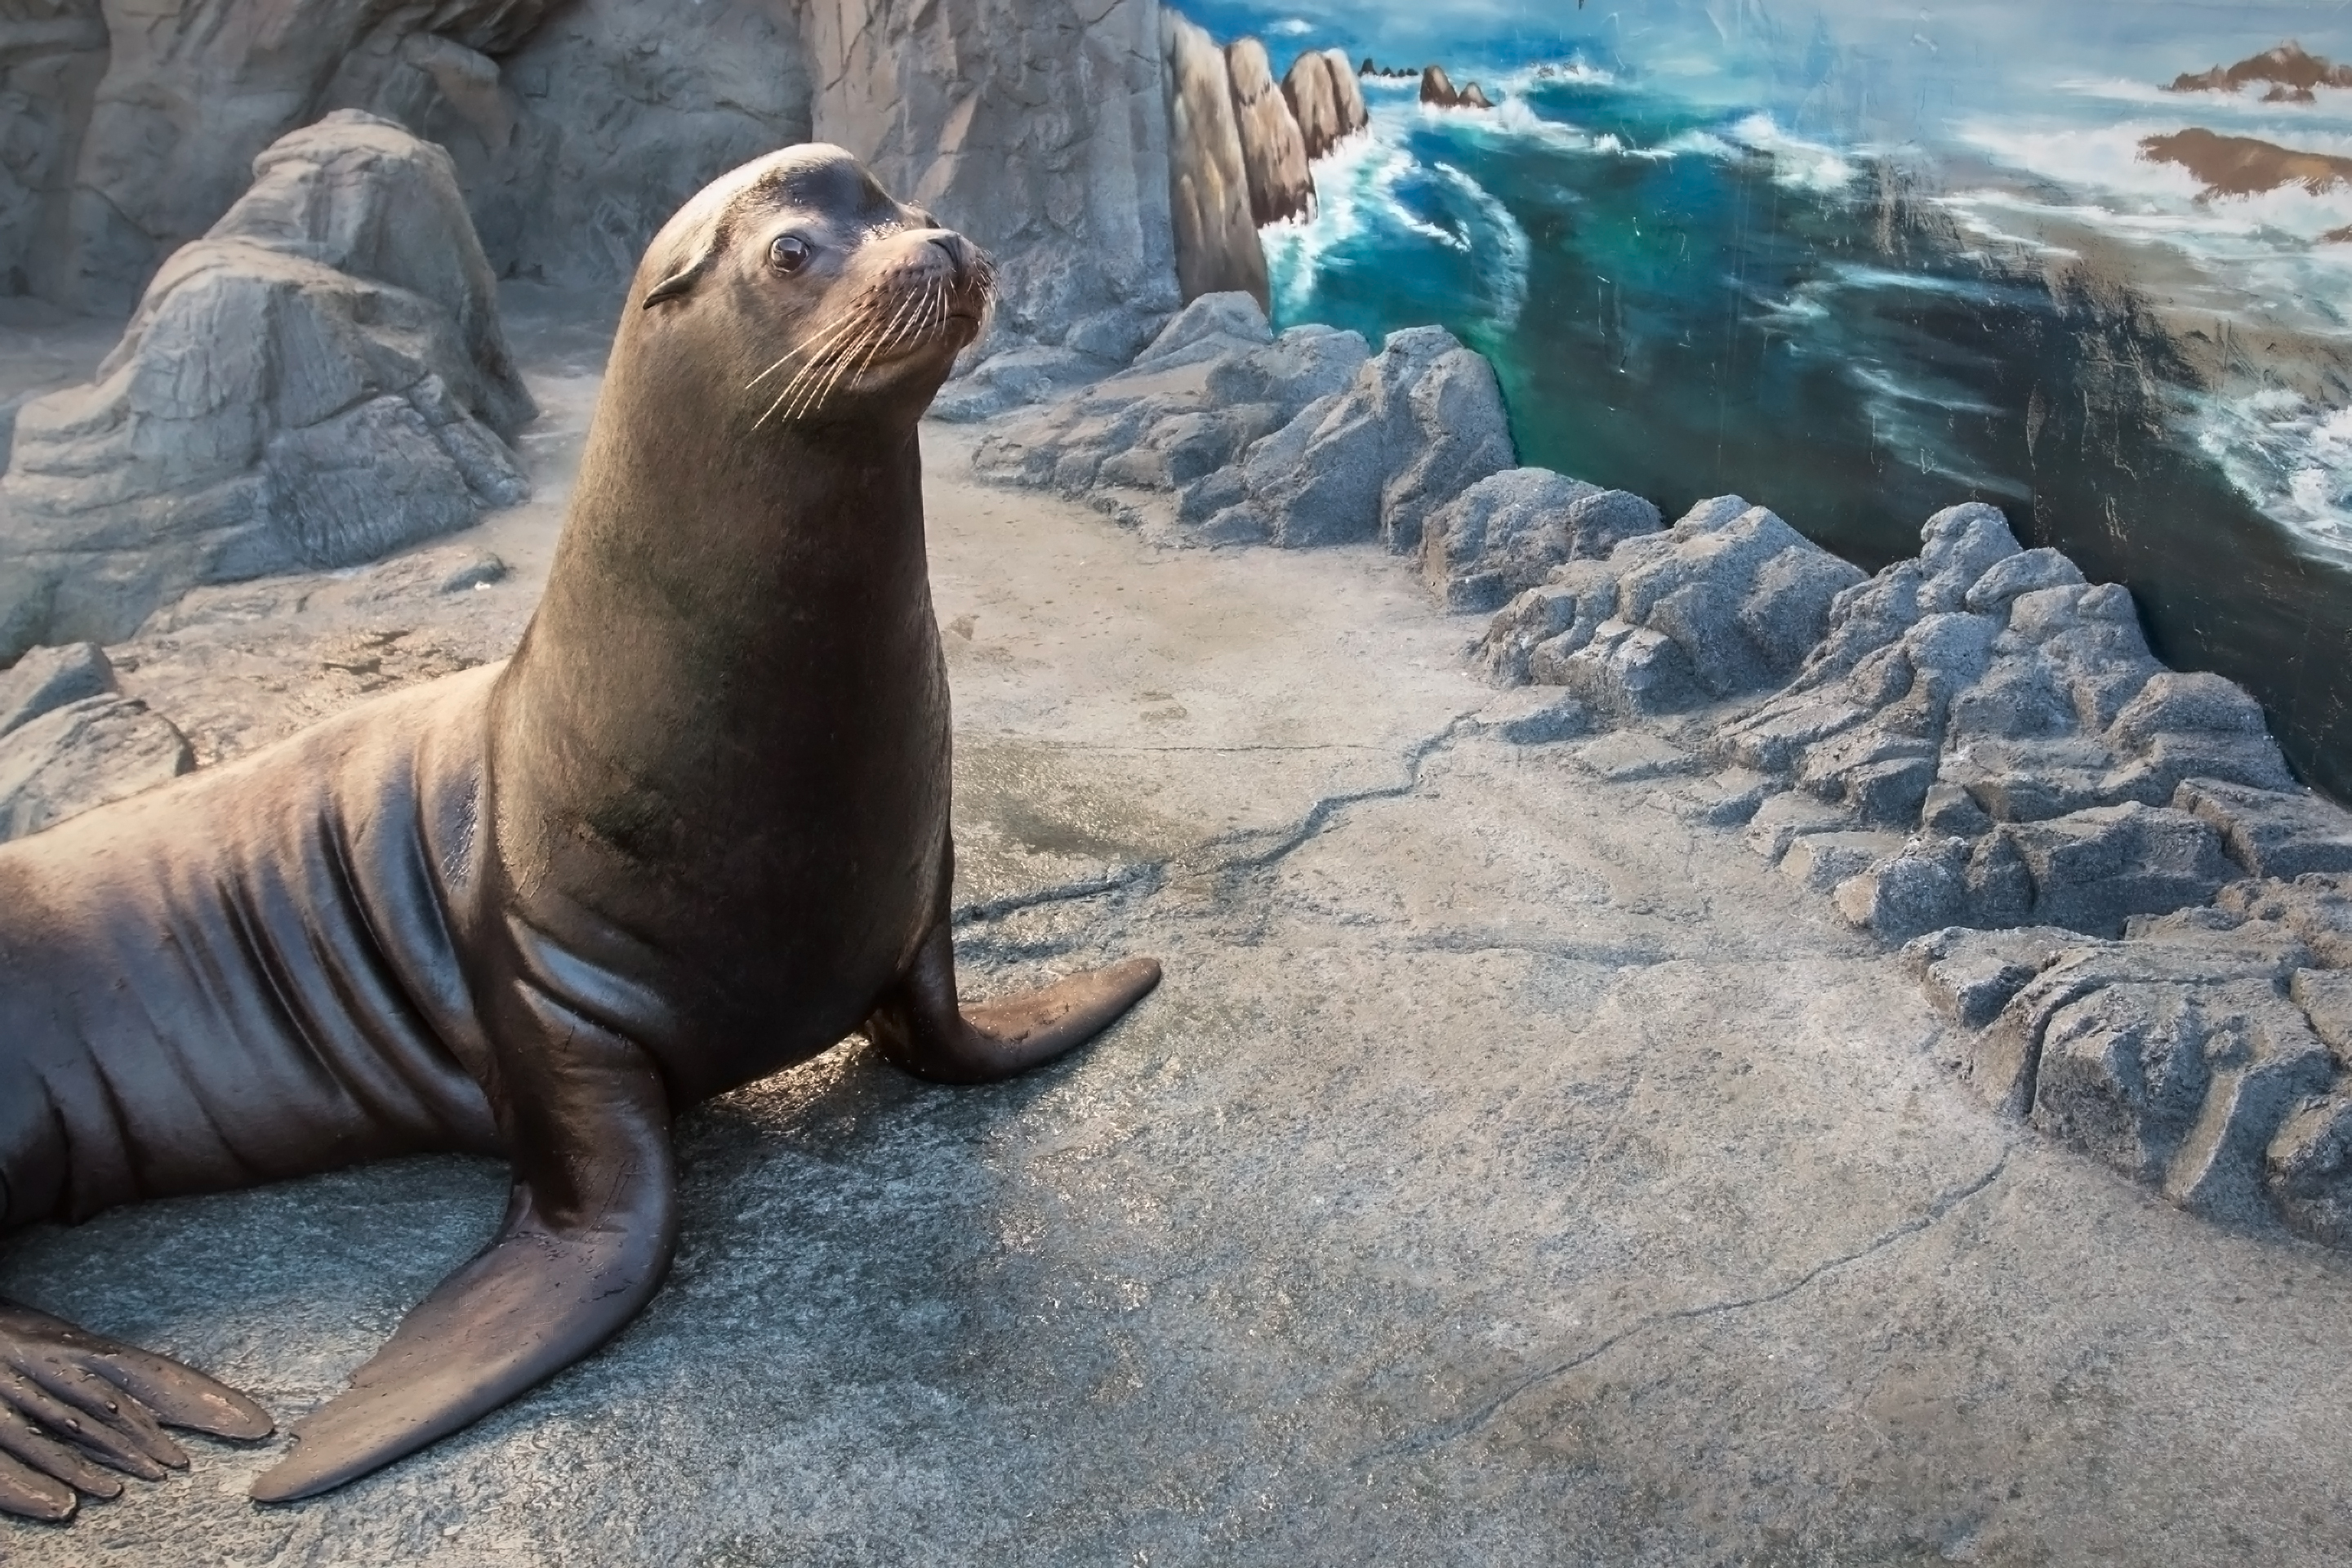 Sea lion stating in exhibit